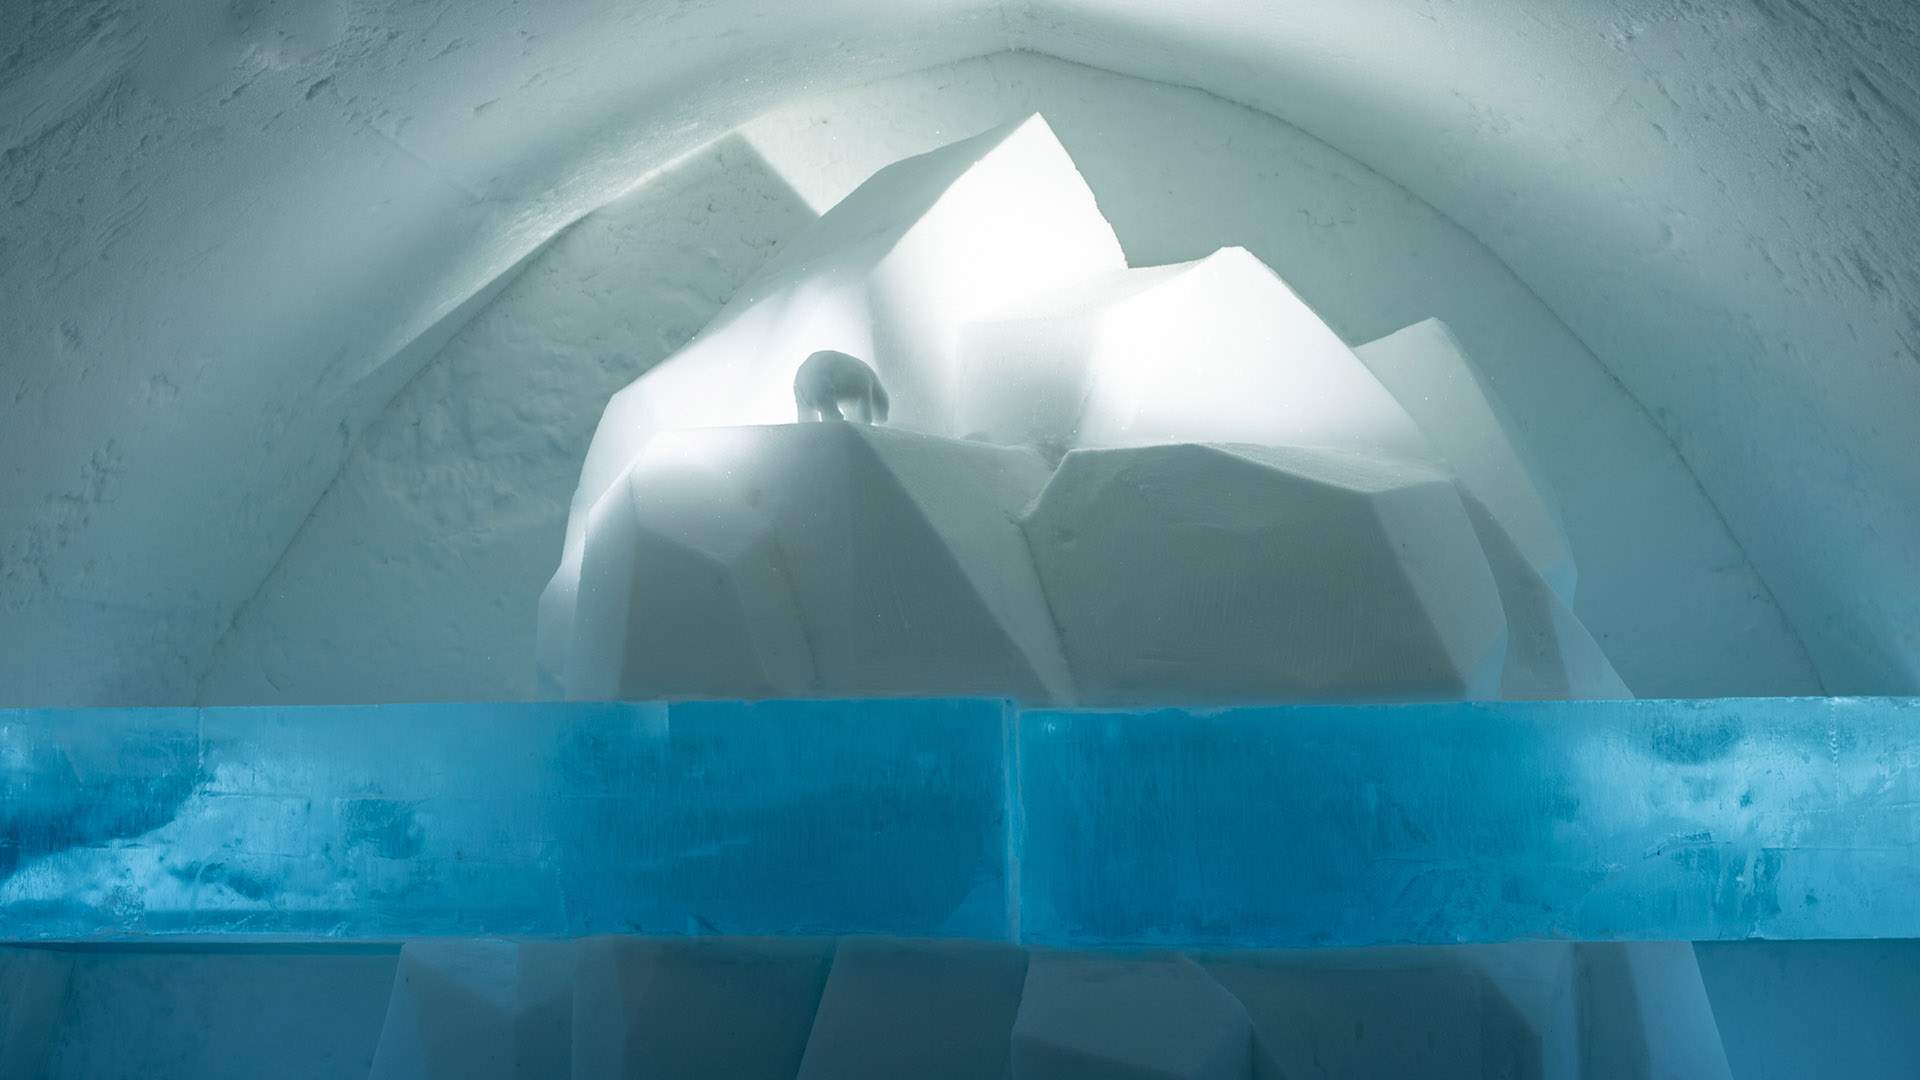 Sweden's Ice Hotel Has Revealed Its Latest Batch of Frosty and Imaginative Artist-Created Rooms